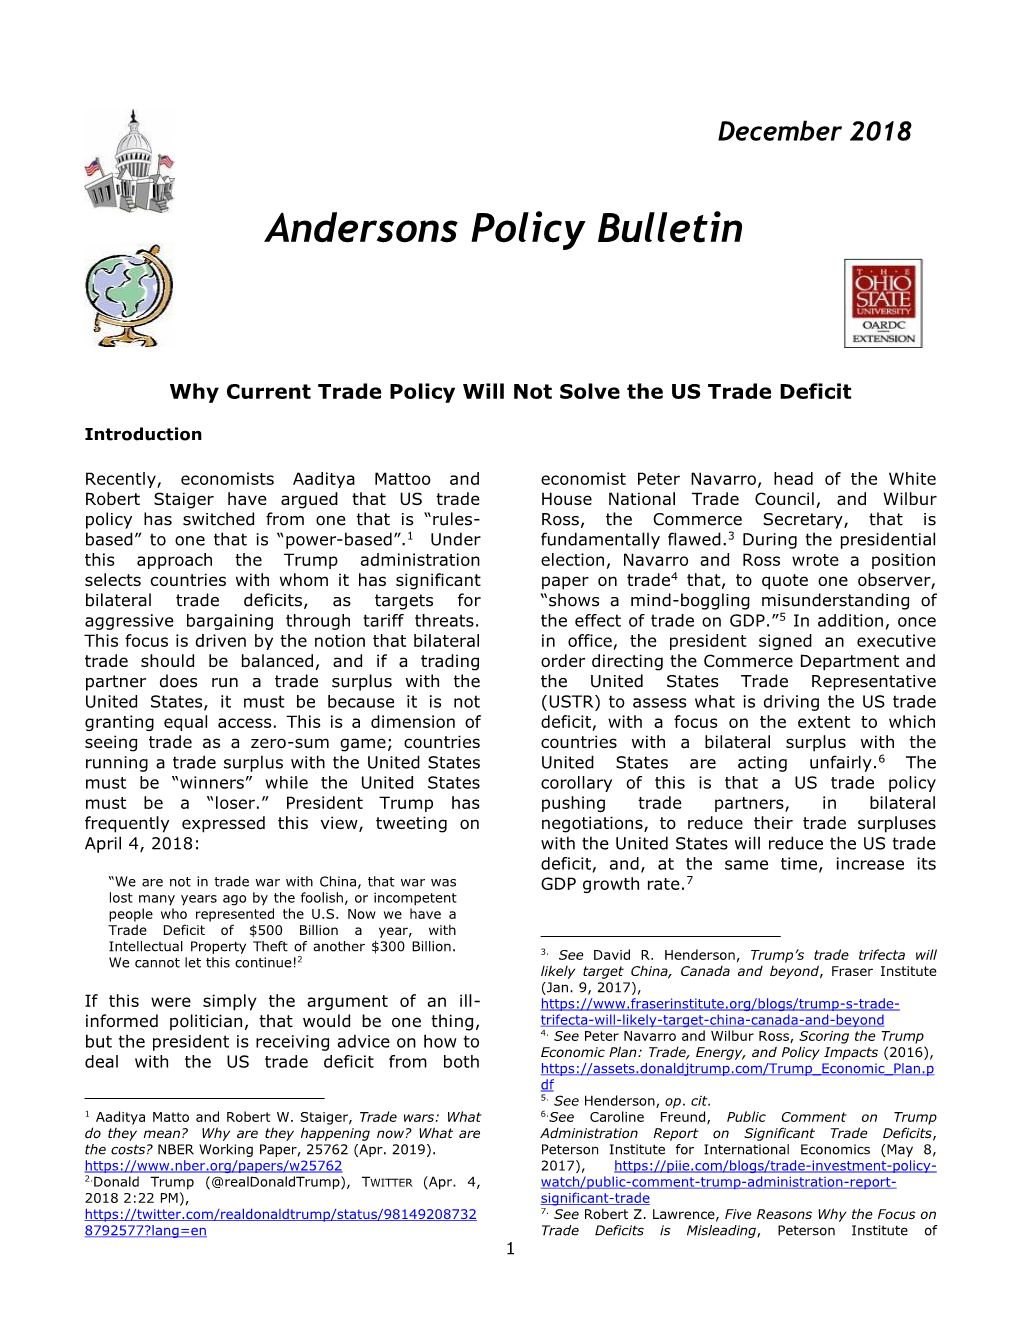 Andersons Policy Bulletin